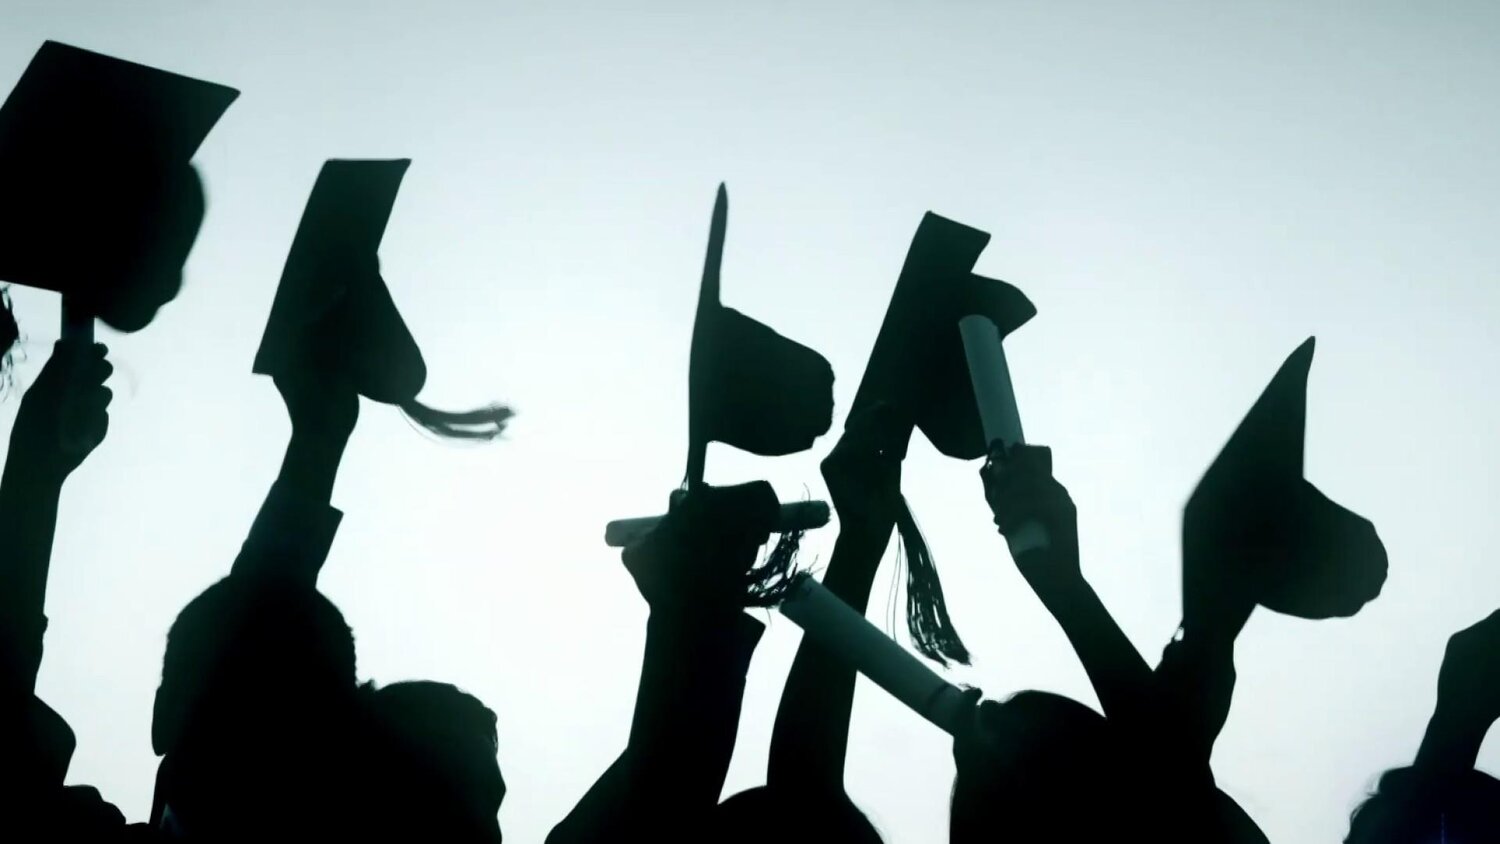 The silhouette of graduates tossing their graduation caps in the air in front of a pale blue background